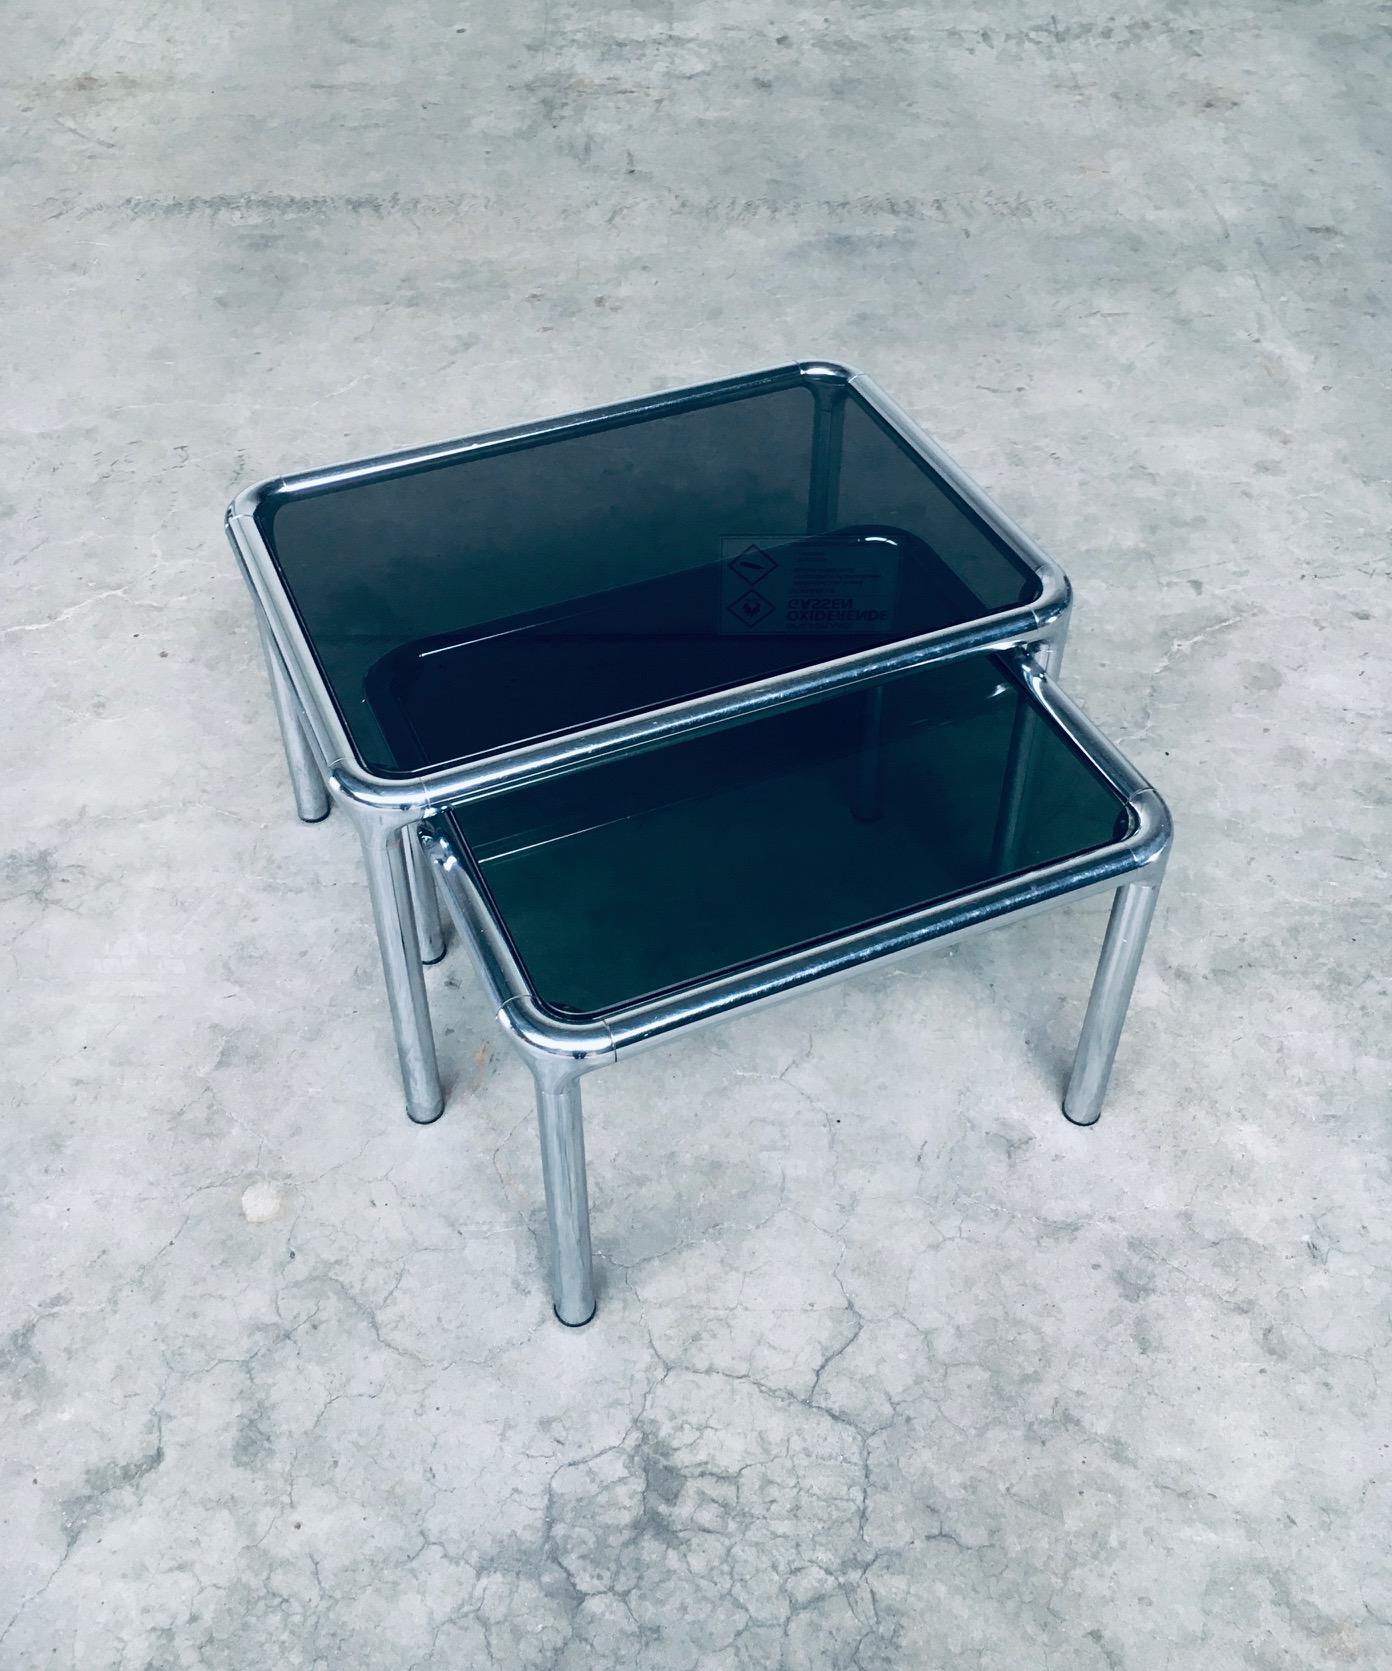 French Chrome & Smoked Glass Nesting Tables by Etienne Fermigier, France 1970's For Sale